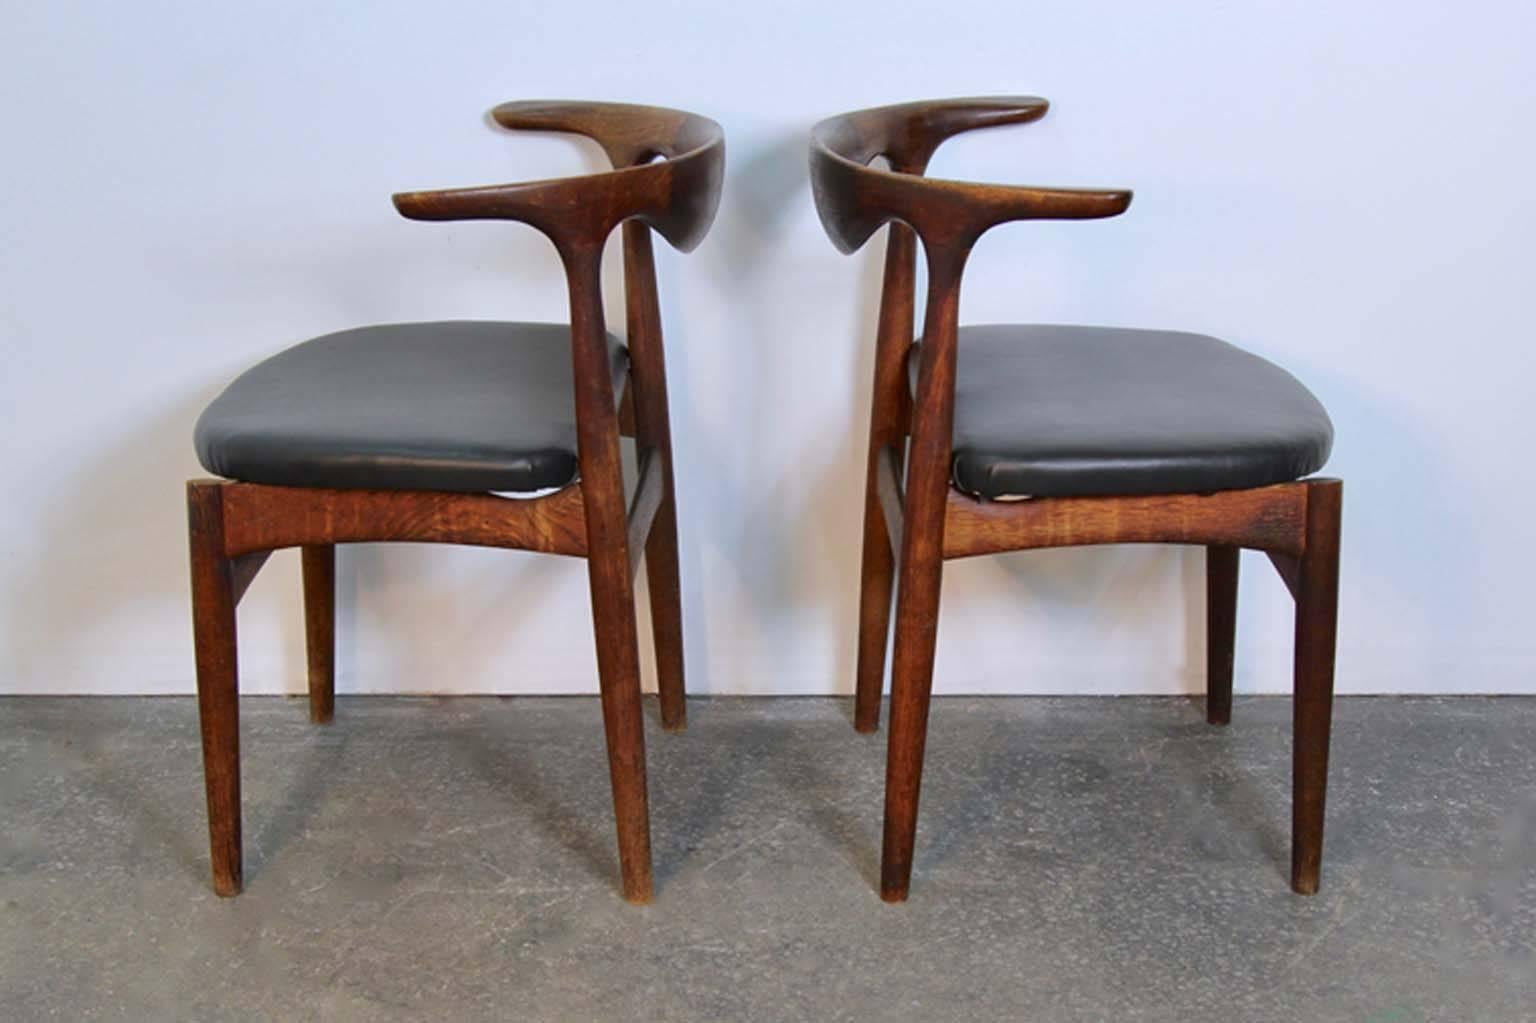 Mid-20th Century Pair of Danish Modern Teak and Leather Seat Chairs For Sale